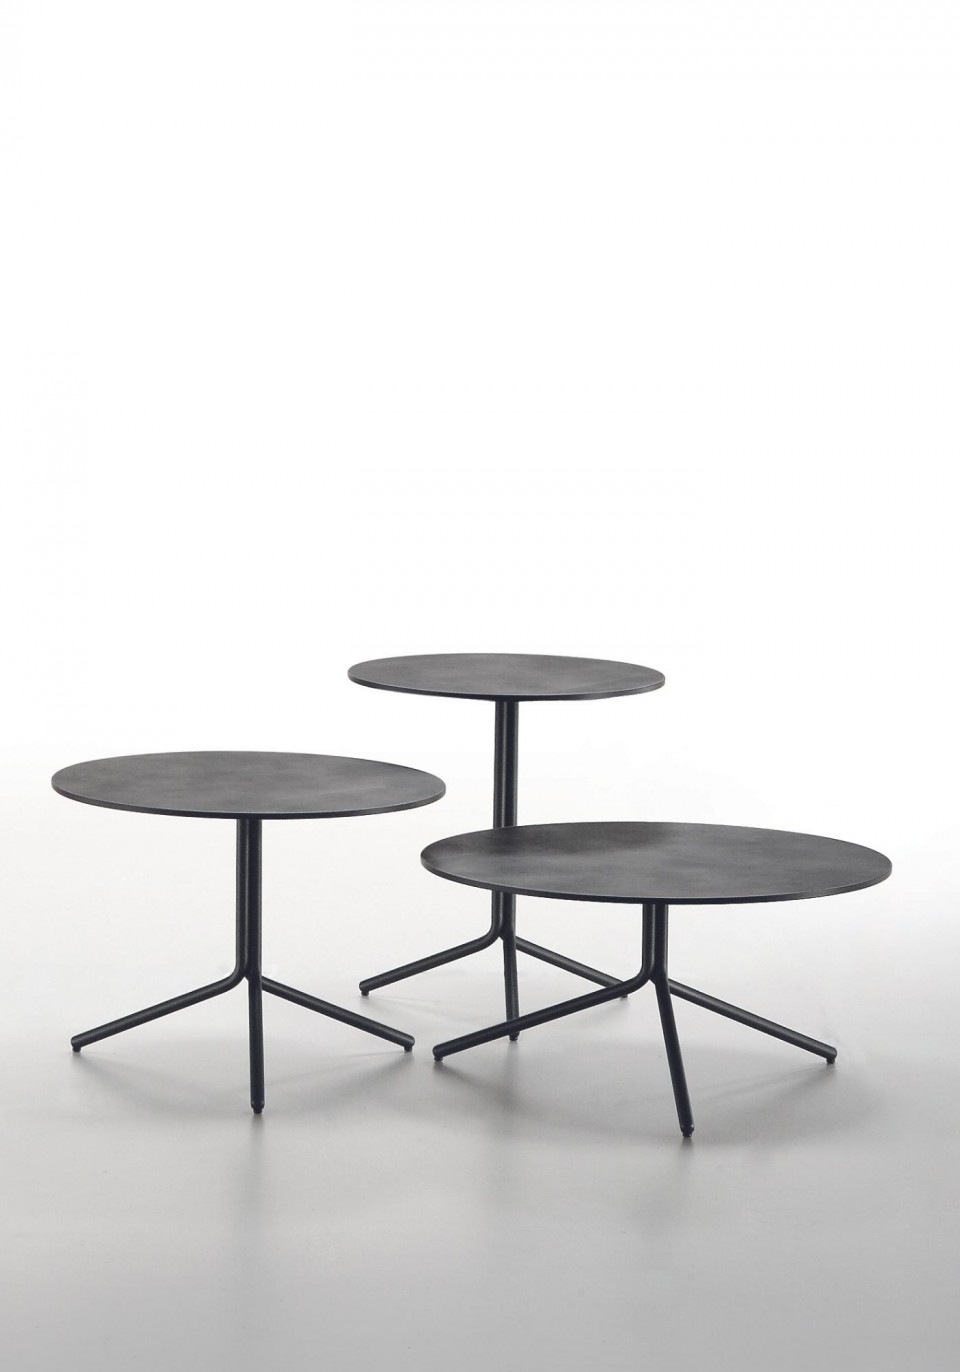 Trampoliere coffee table designed by MIDJ